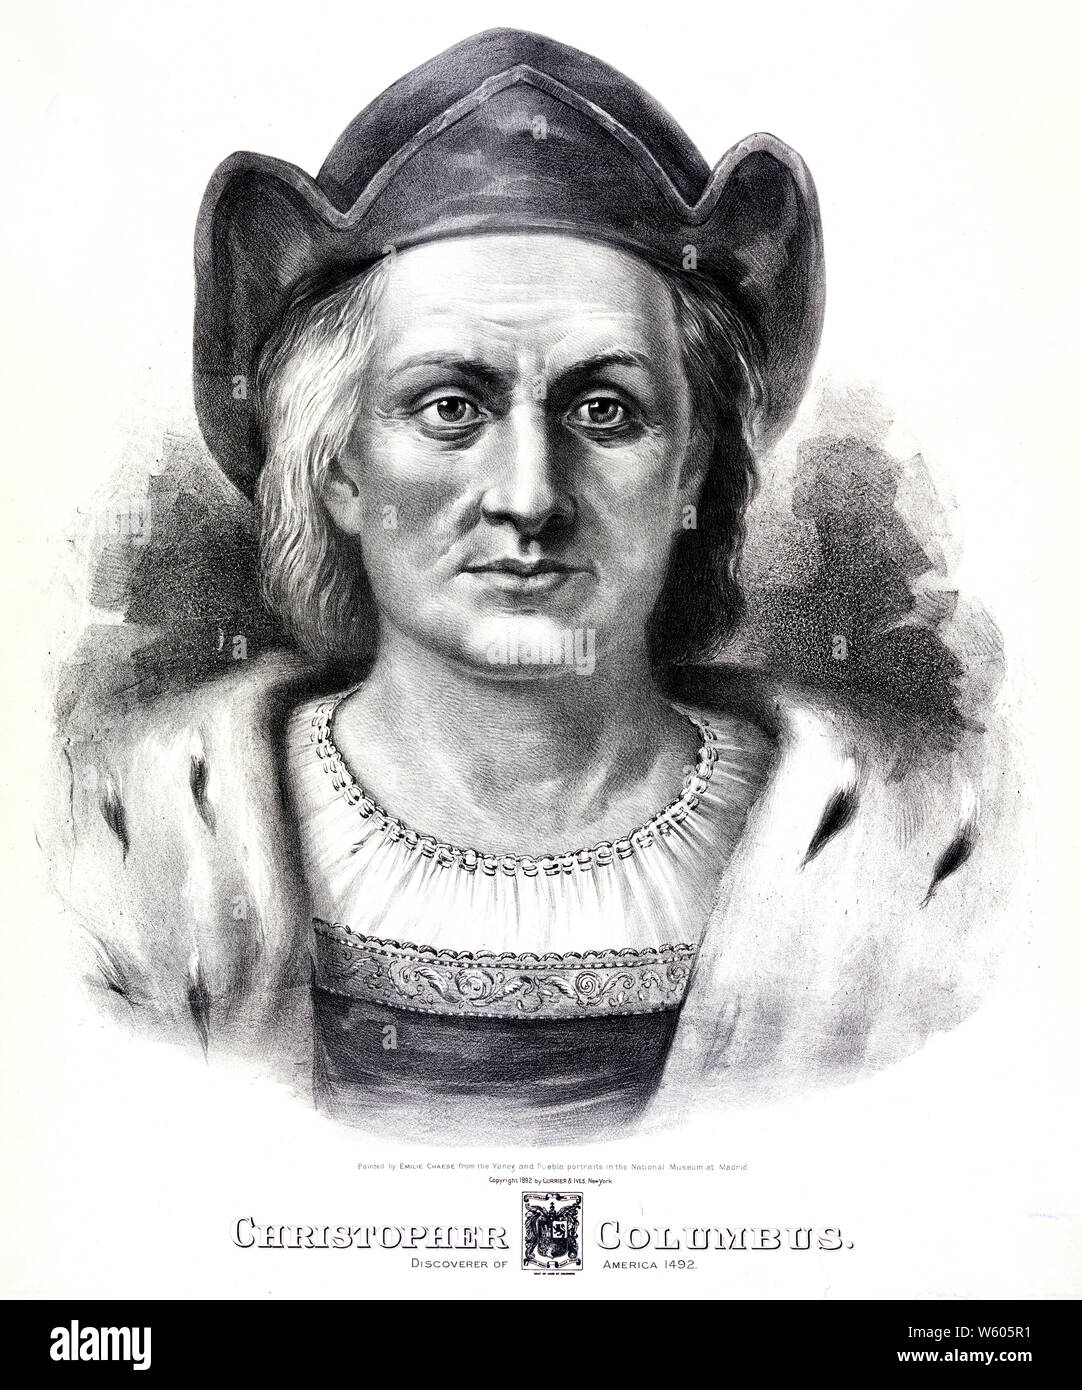 Christopher Columbus: Discoverer of America 1492 (printed ca. 1892) Stock Photo